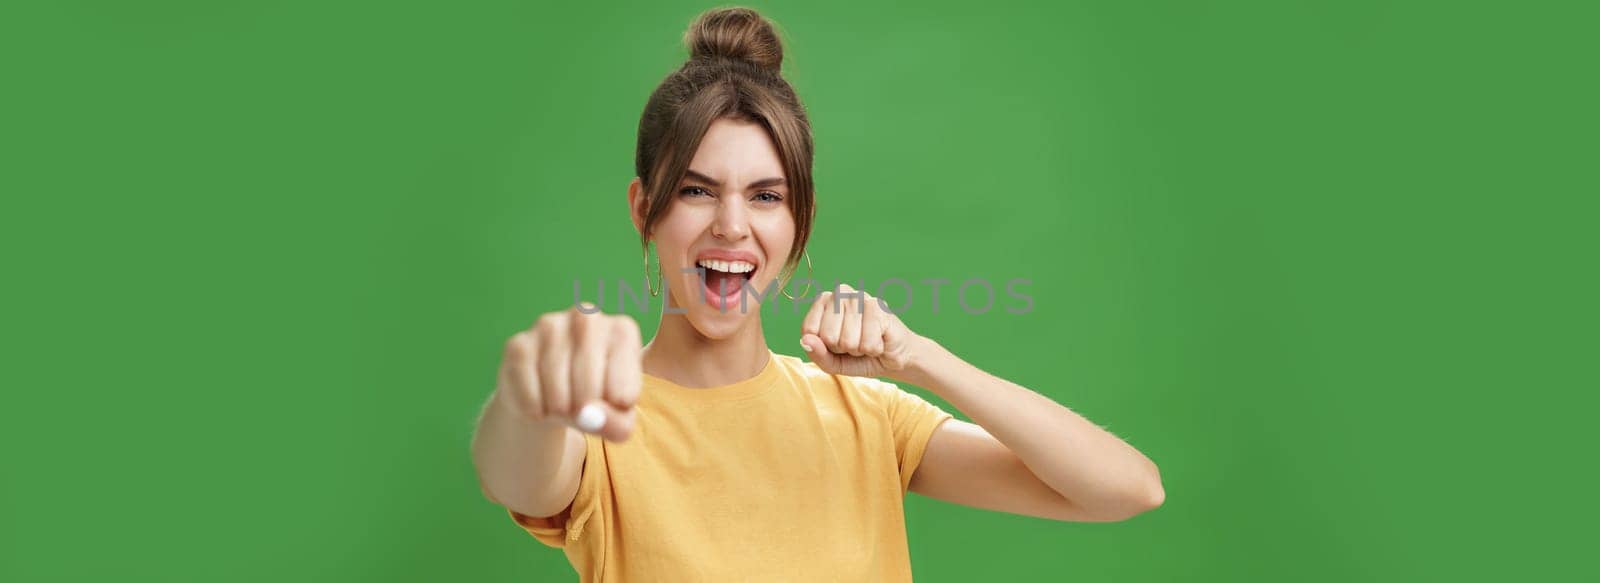 Cute female rebel in yellow t-shirt with gap teeth pulling fist towards camera as if showing fighting skills yelling daring and excited standing over green background smiling acting like boxer by Benzoix